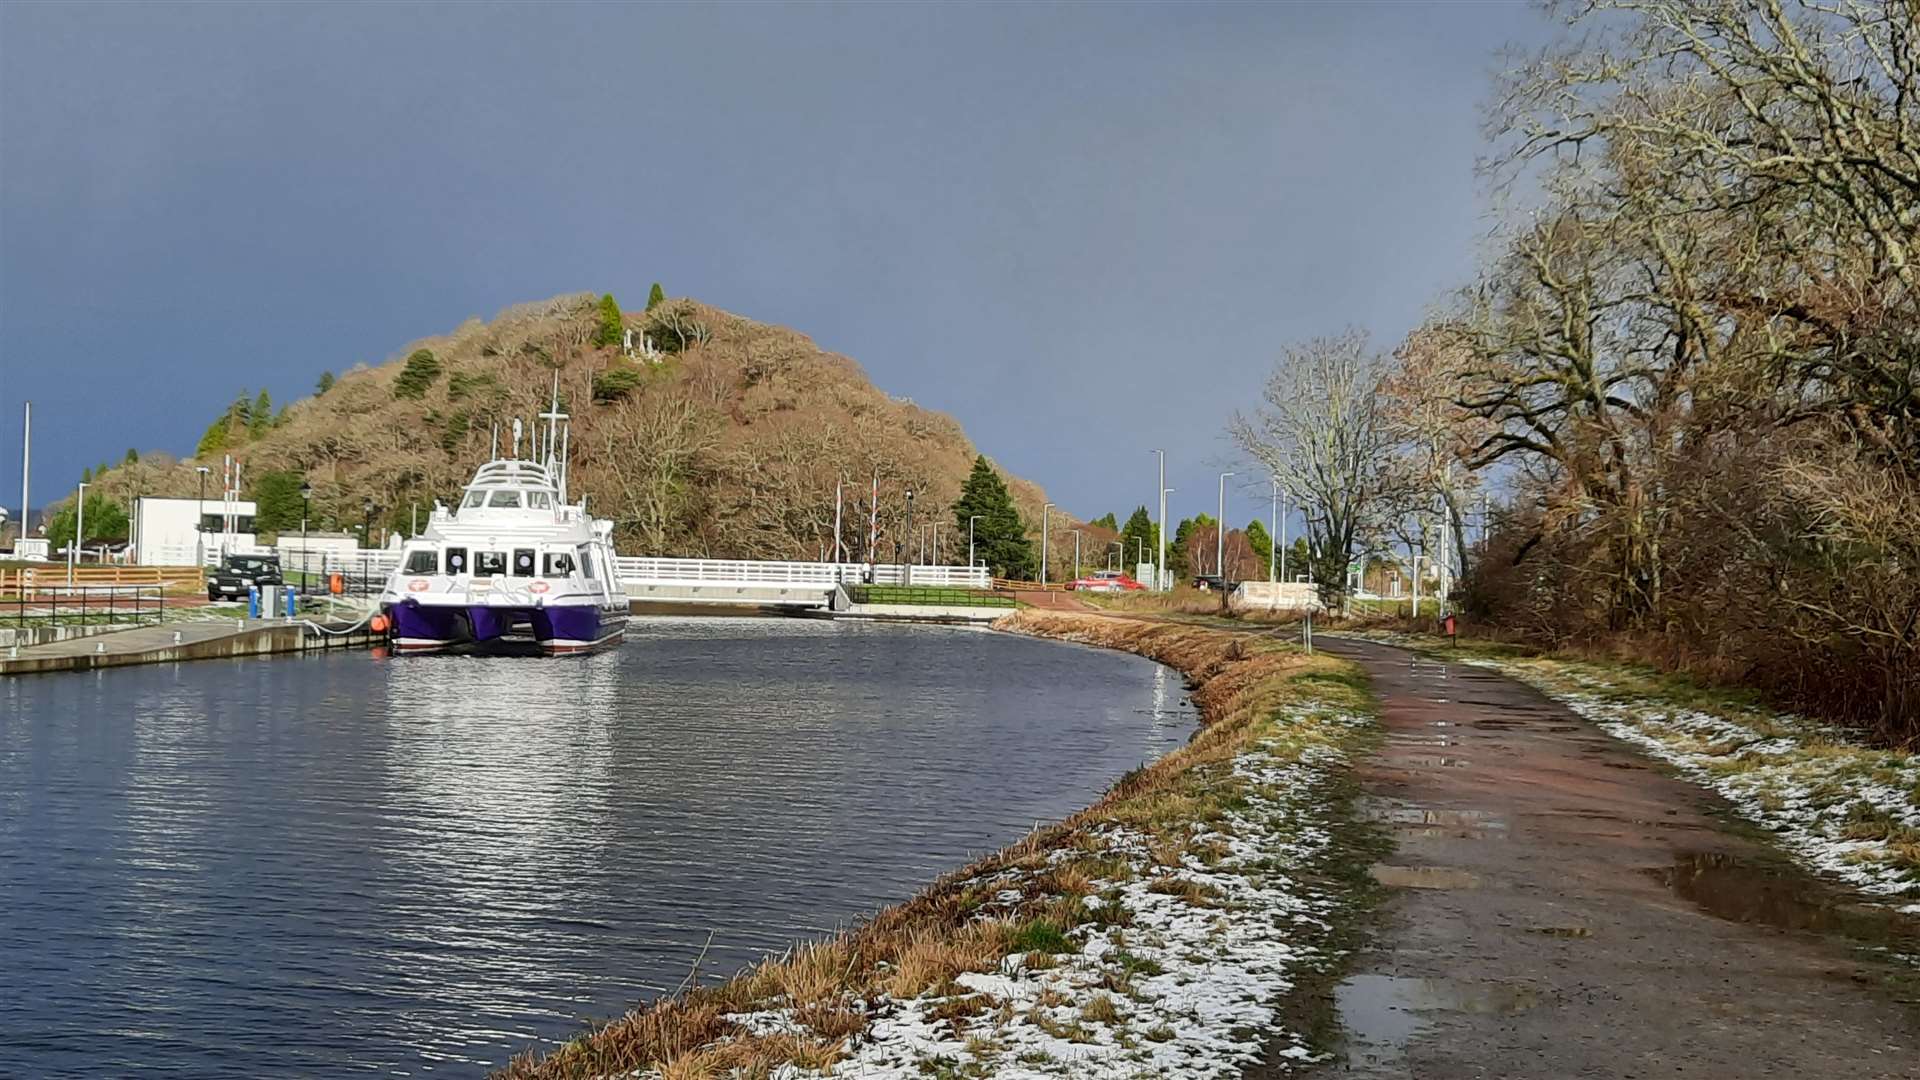 The Caledonian Canal and Tomnahurich Cemetery.